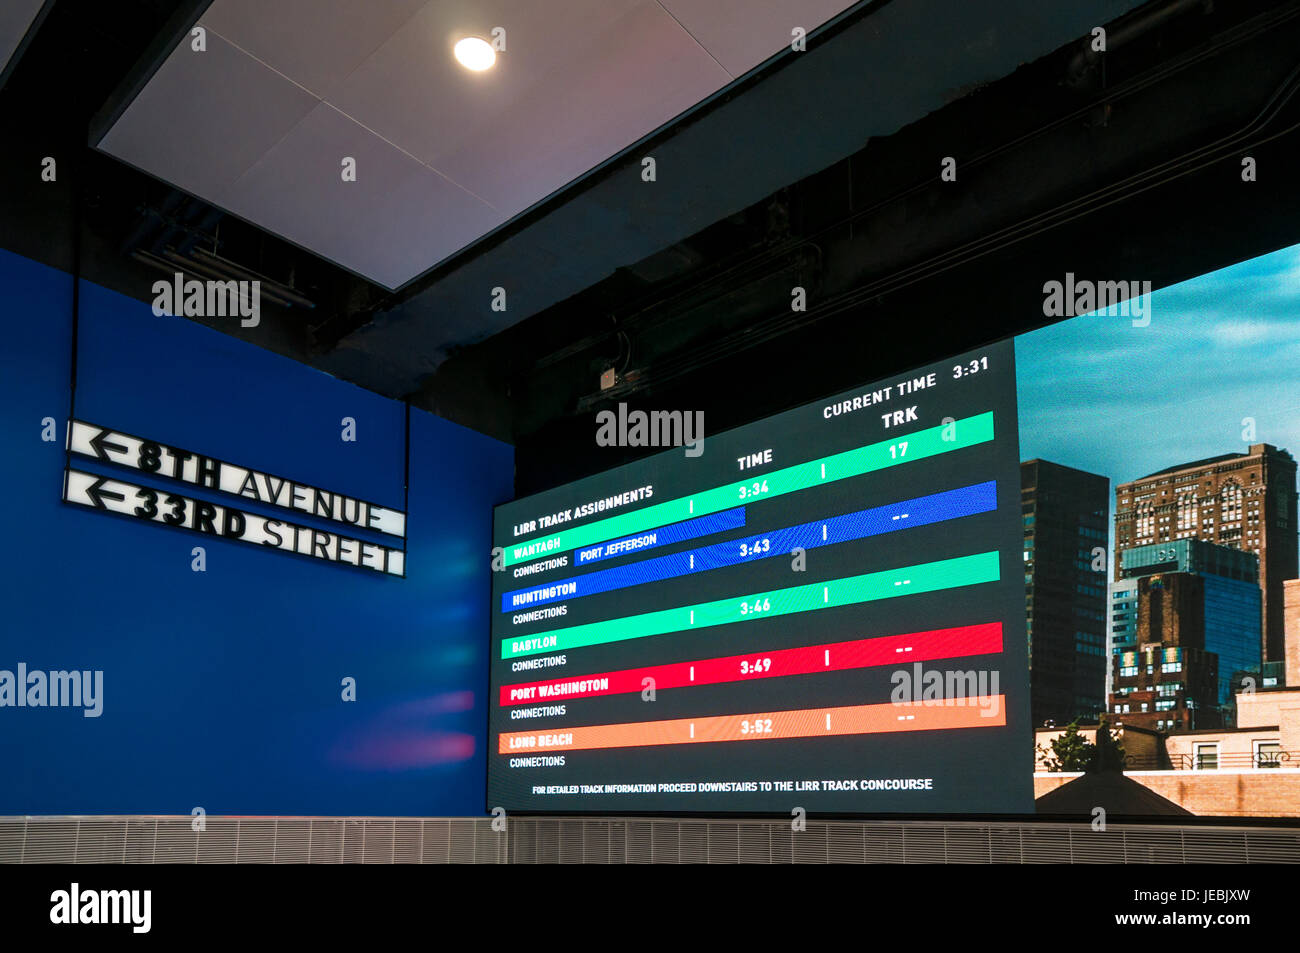 Penn Station's new look with modern improvements shows a schedule display in colors Stock Photo